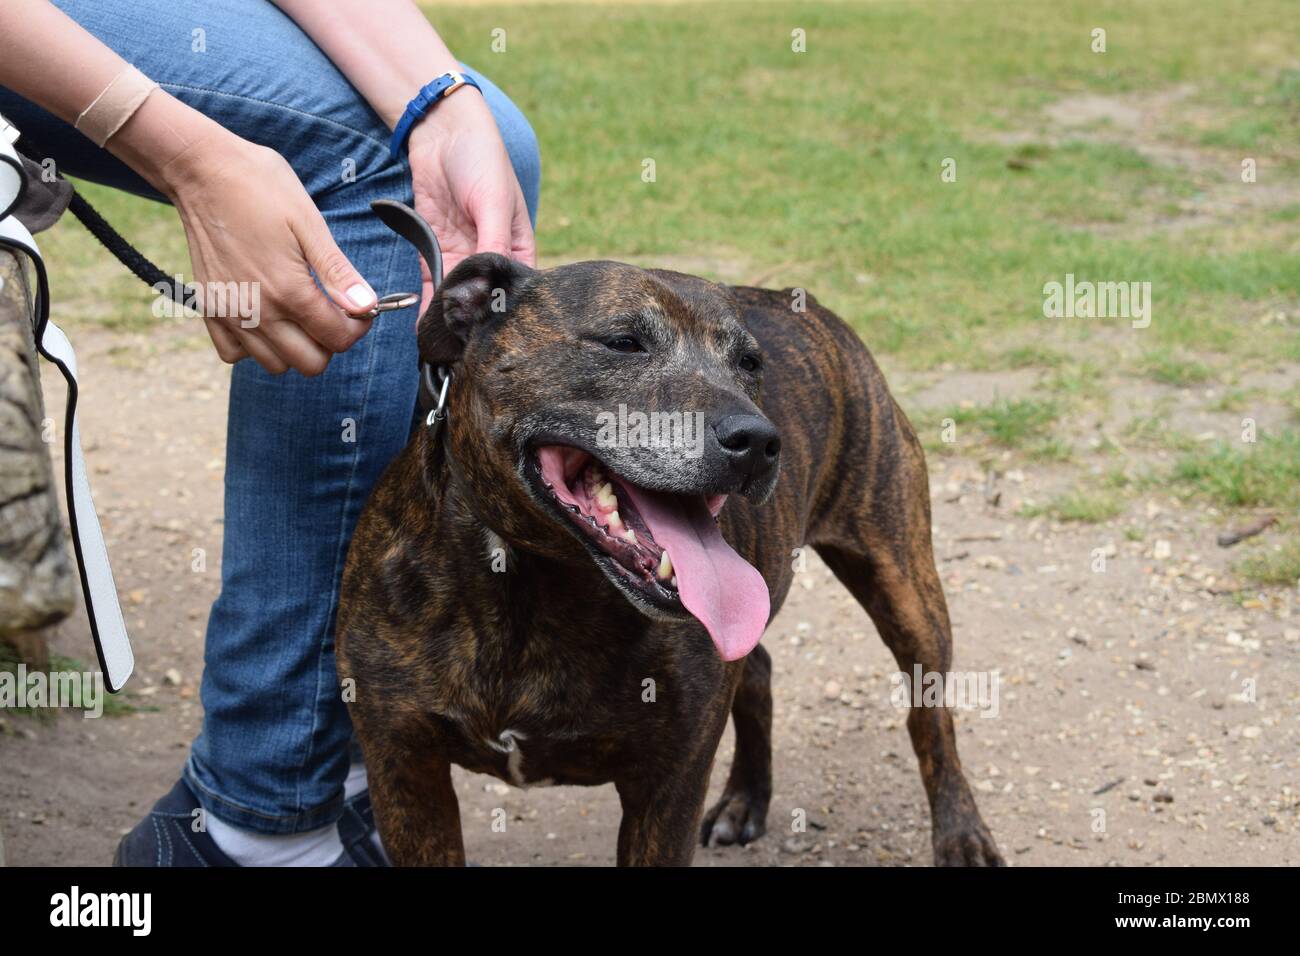 Excited Dog Panting as the Owner Clips the Leash onto the Collar Stock Photo